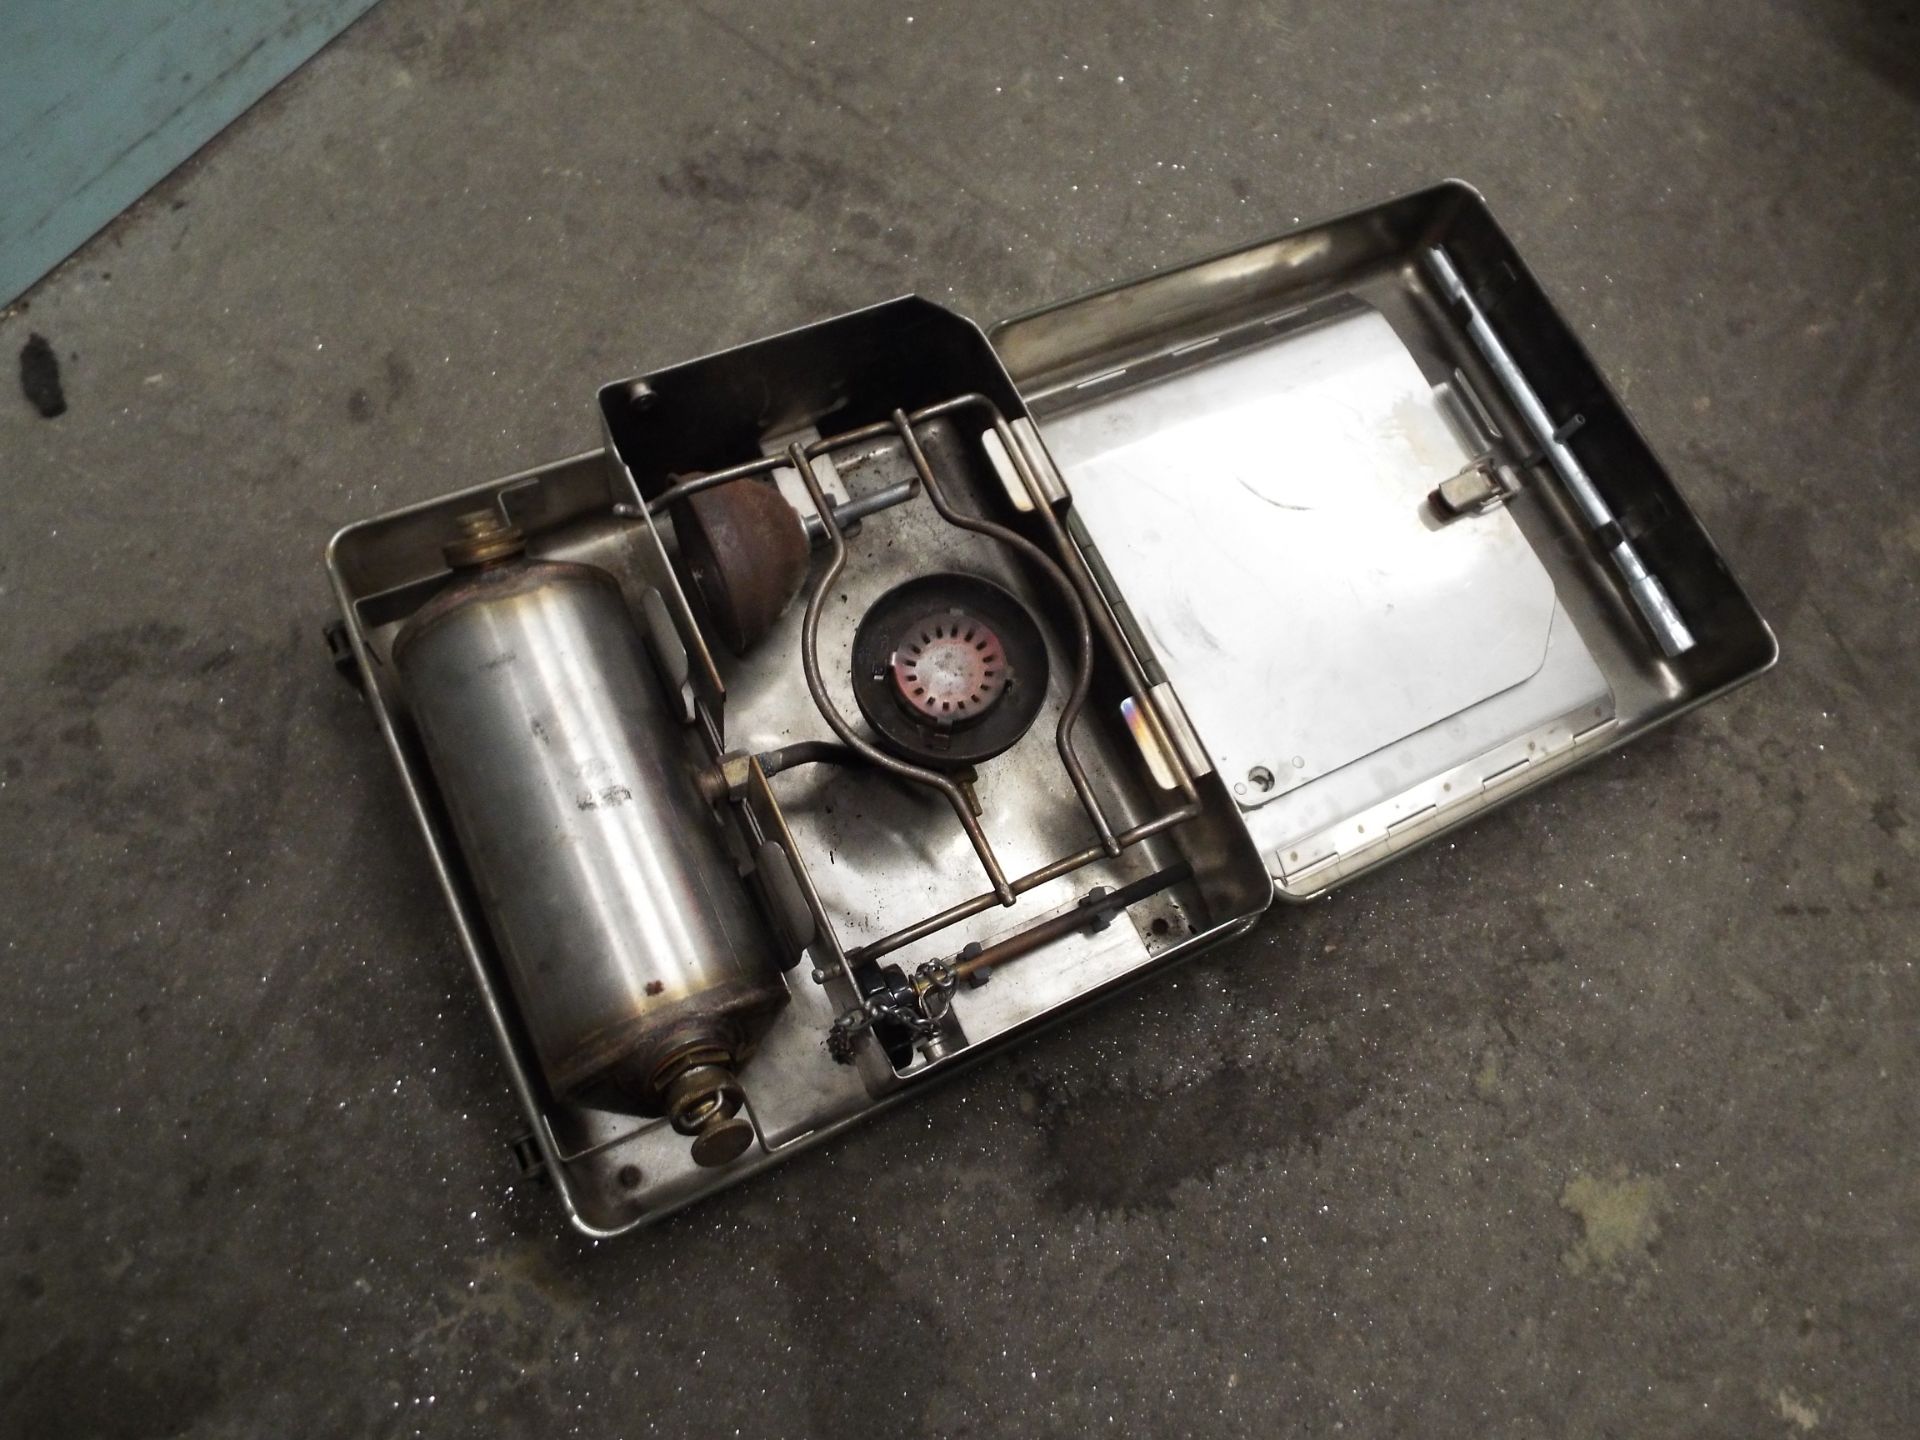 No. 12 Stove, Diesel Cooker/Camping Stove - Image 4 of 6